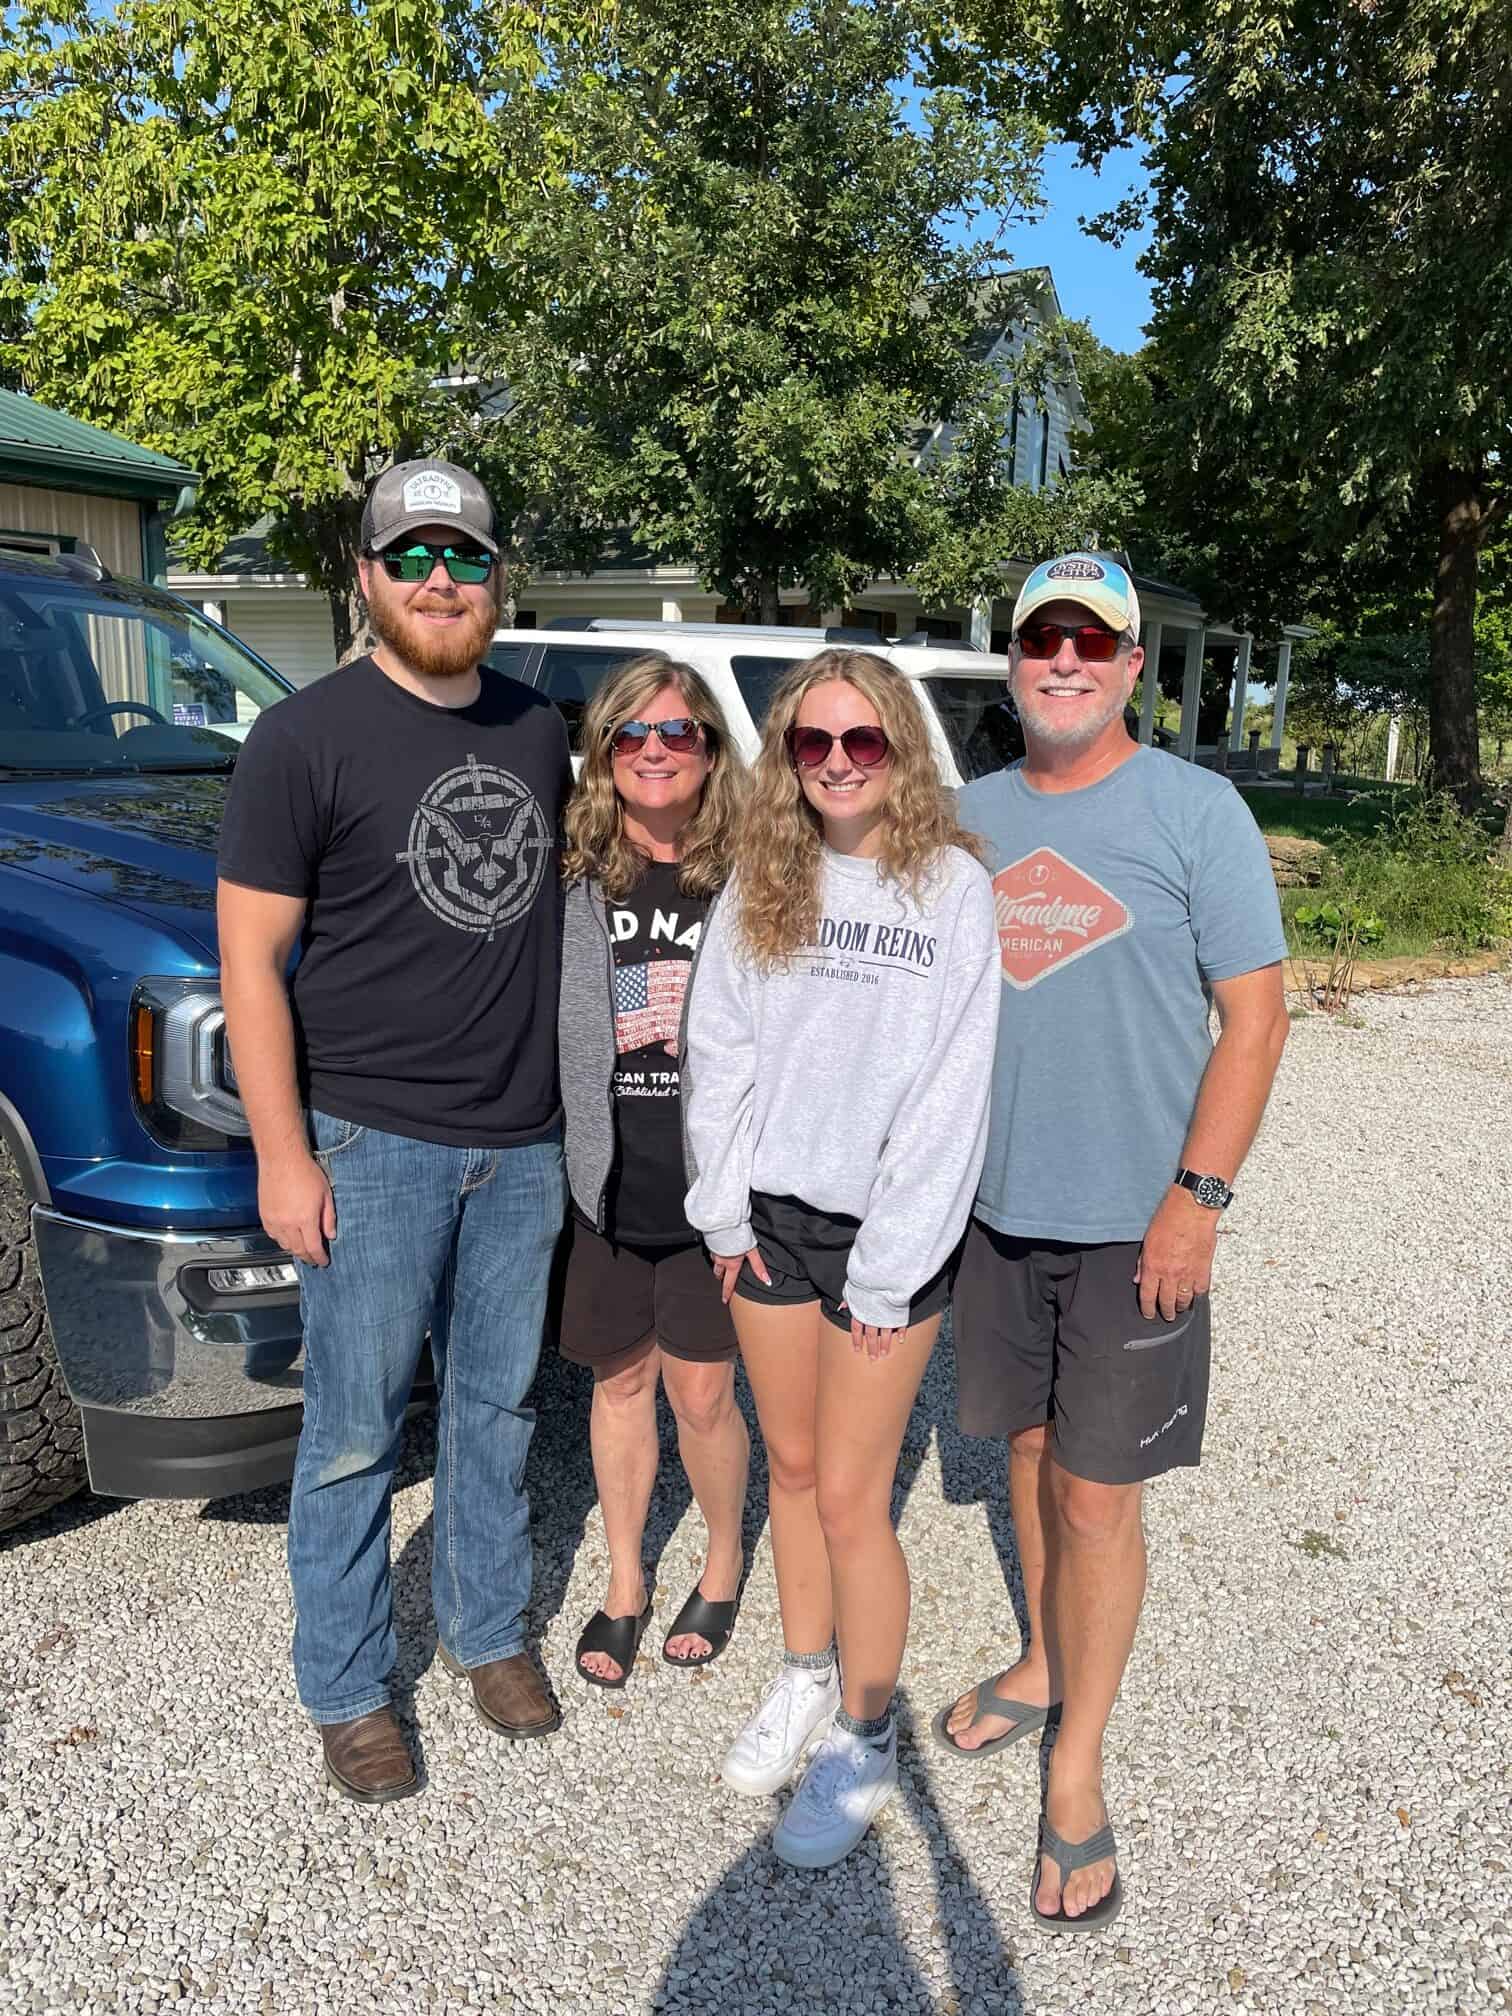 Corey's son, Tanner Thomas, recently received a degree in mechanical engineering, and his daughter, Grace Thomas, is currently studying fashion at K-State.